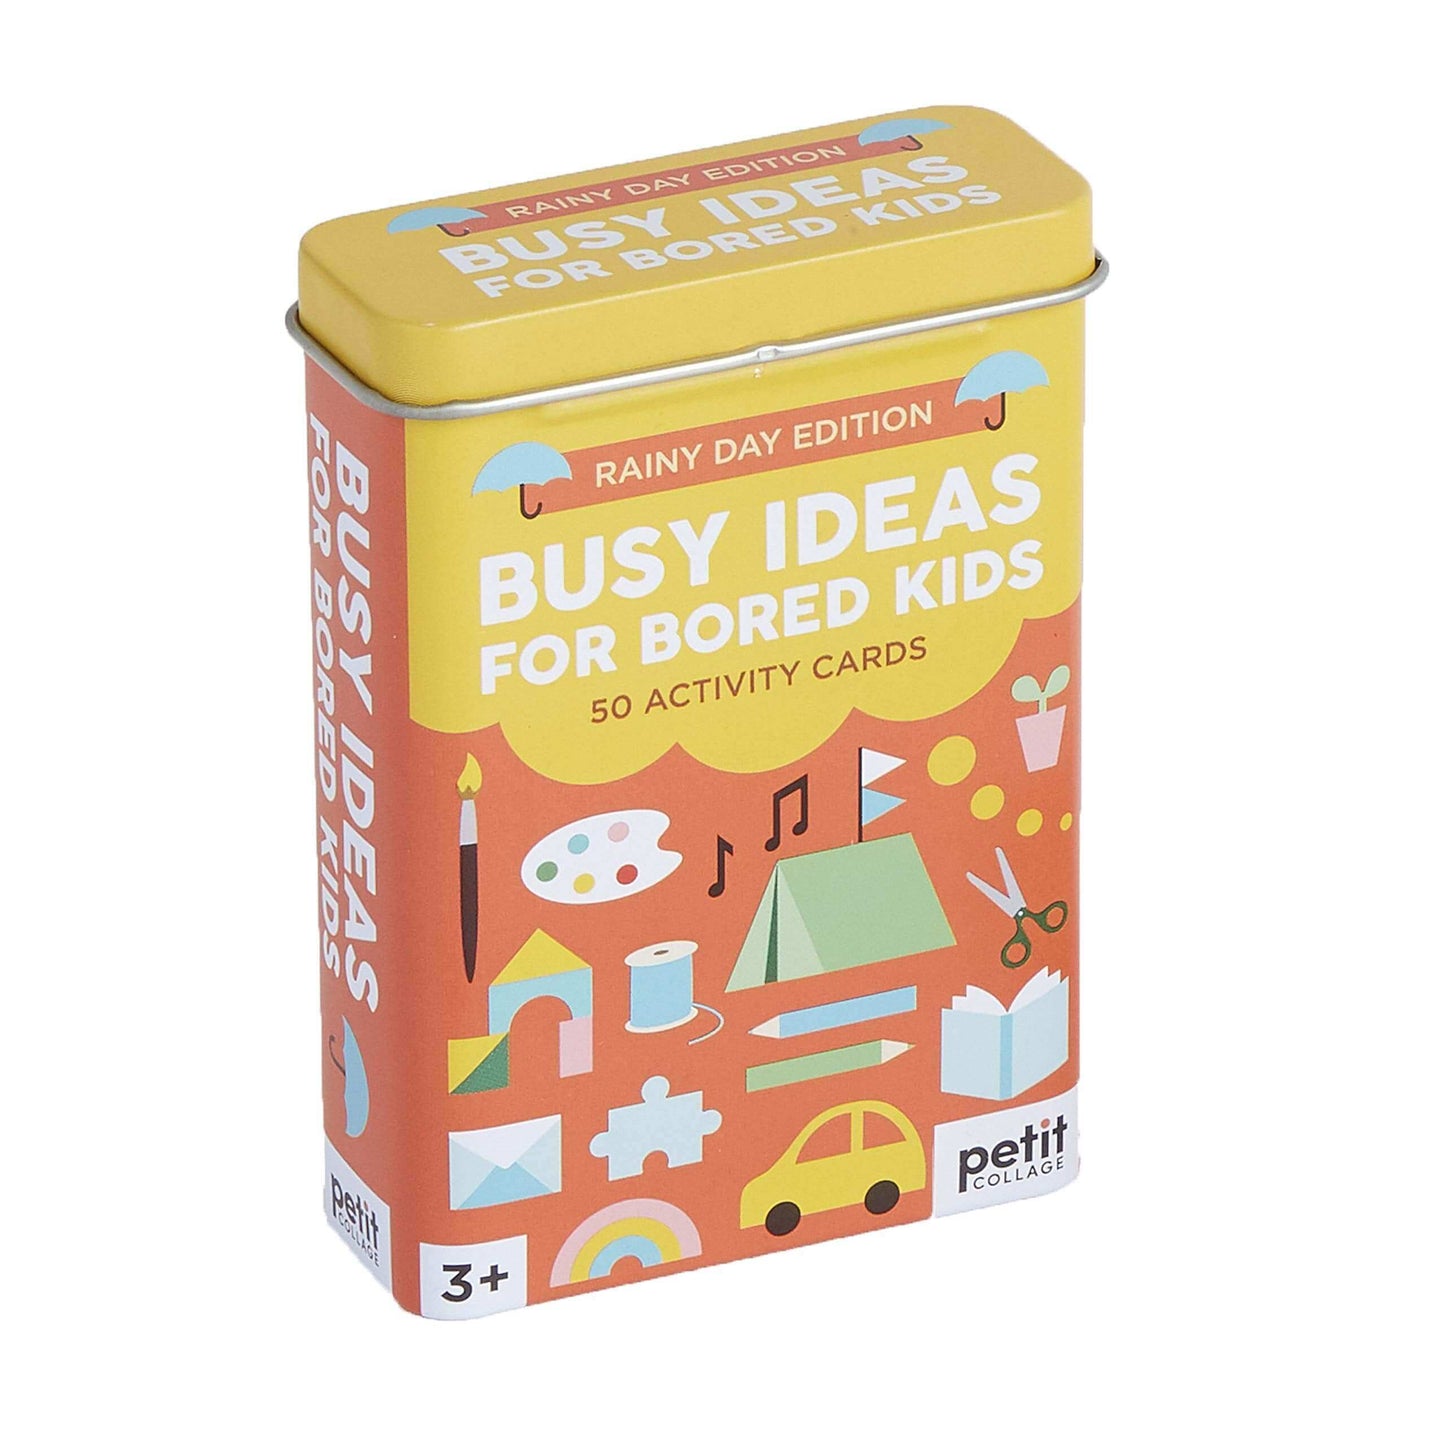 Busy Ideas For Bored Kids: Rainy Day Edition, Petit Collage, eco-friendly Toys, Mountain Kids Toys